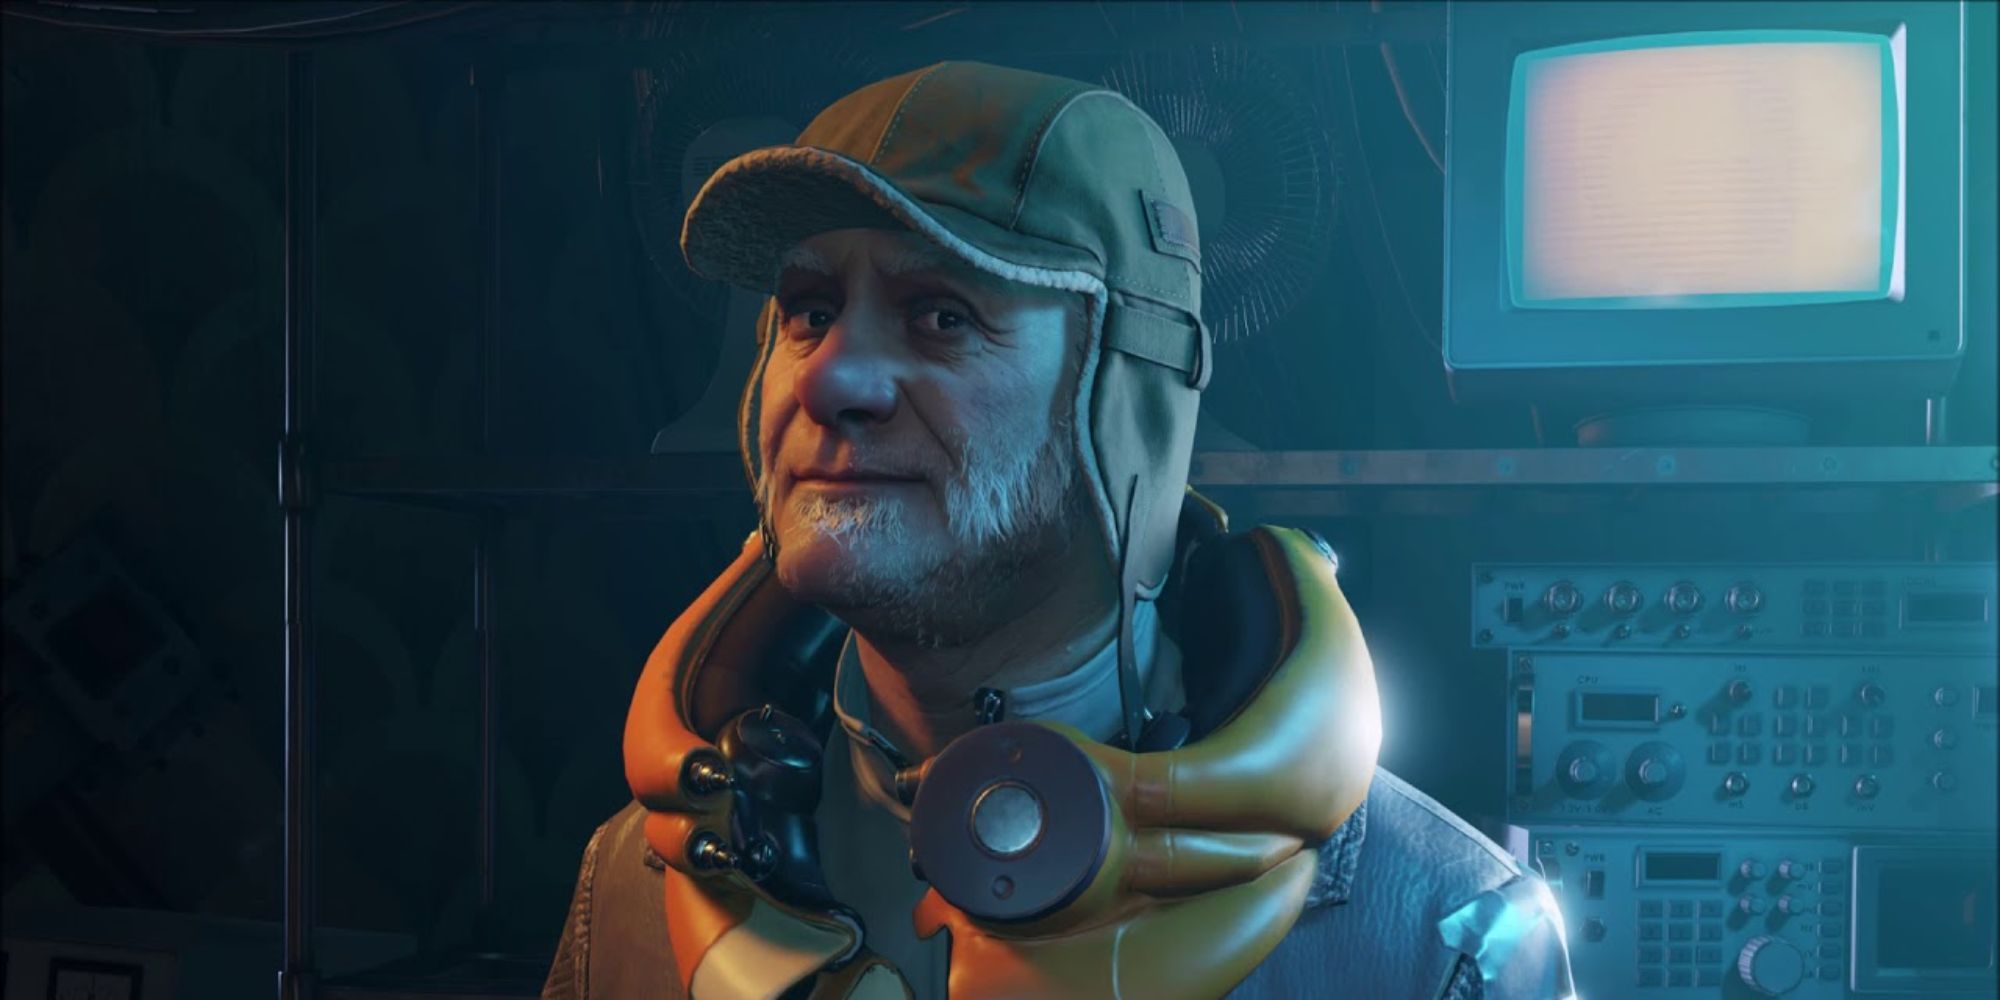 Russel's appearance as seen in Half Life Alyx Wearing A Hat